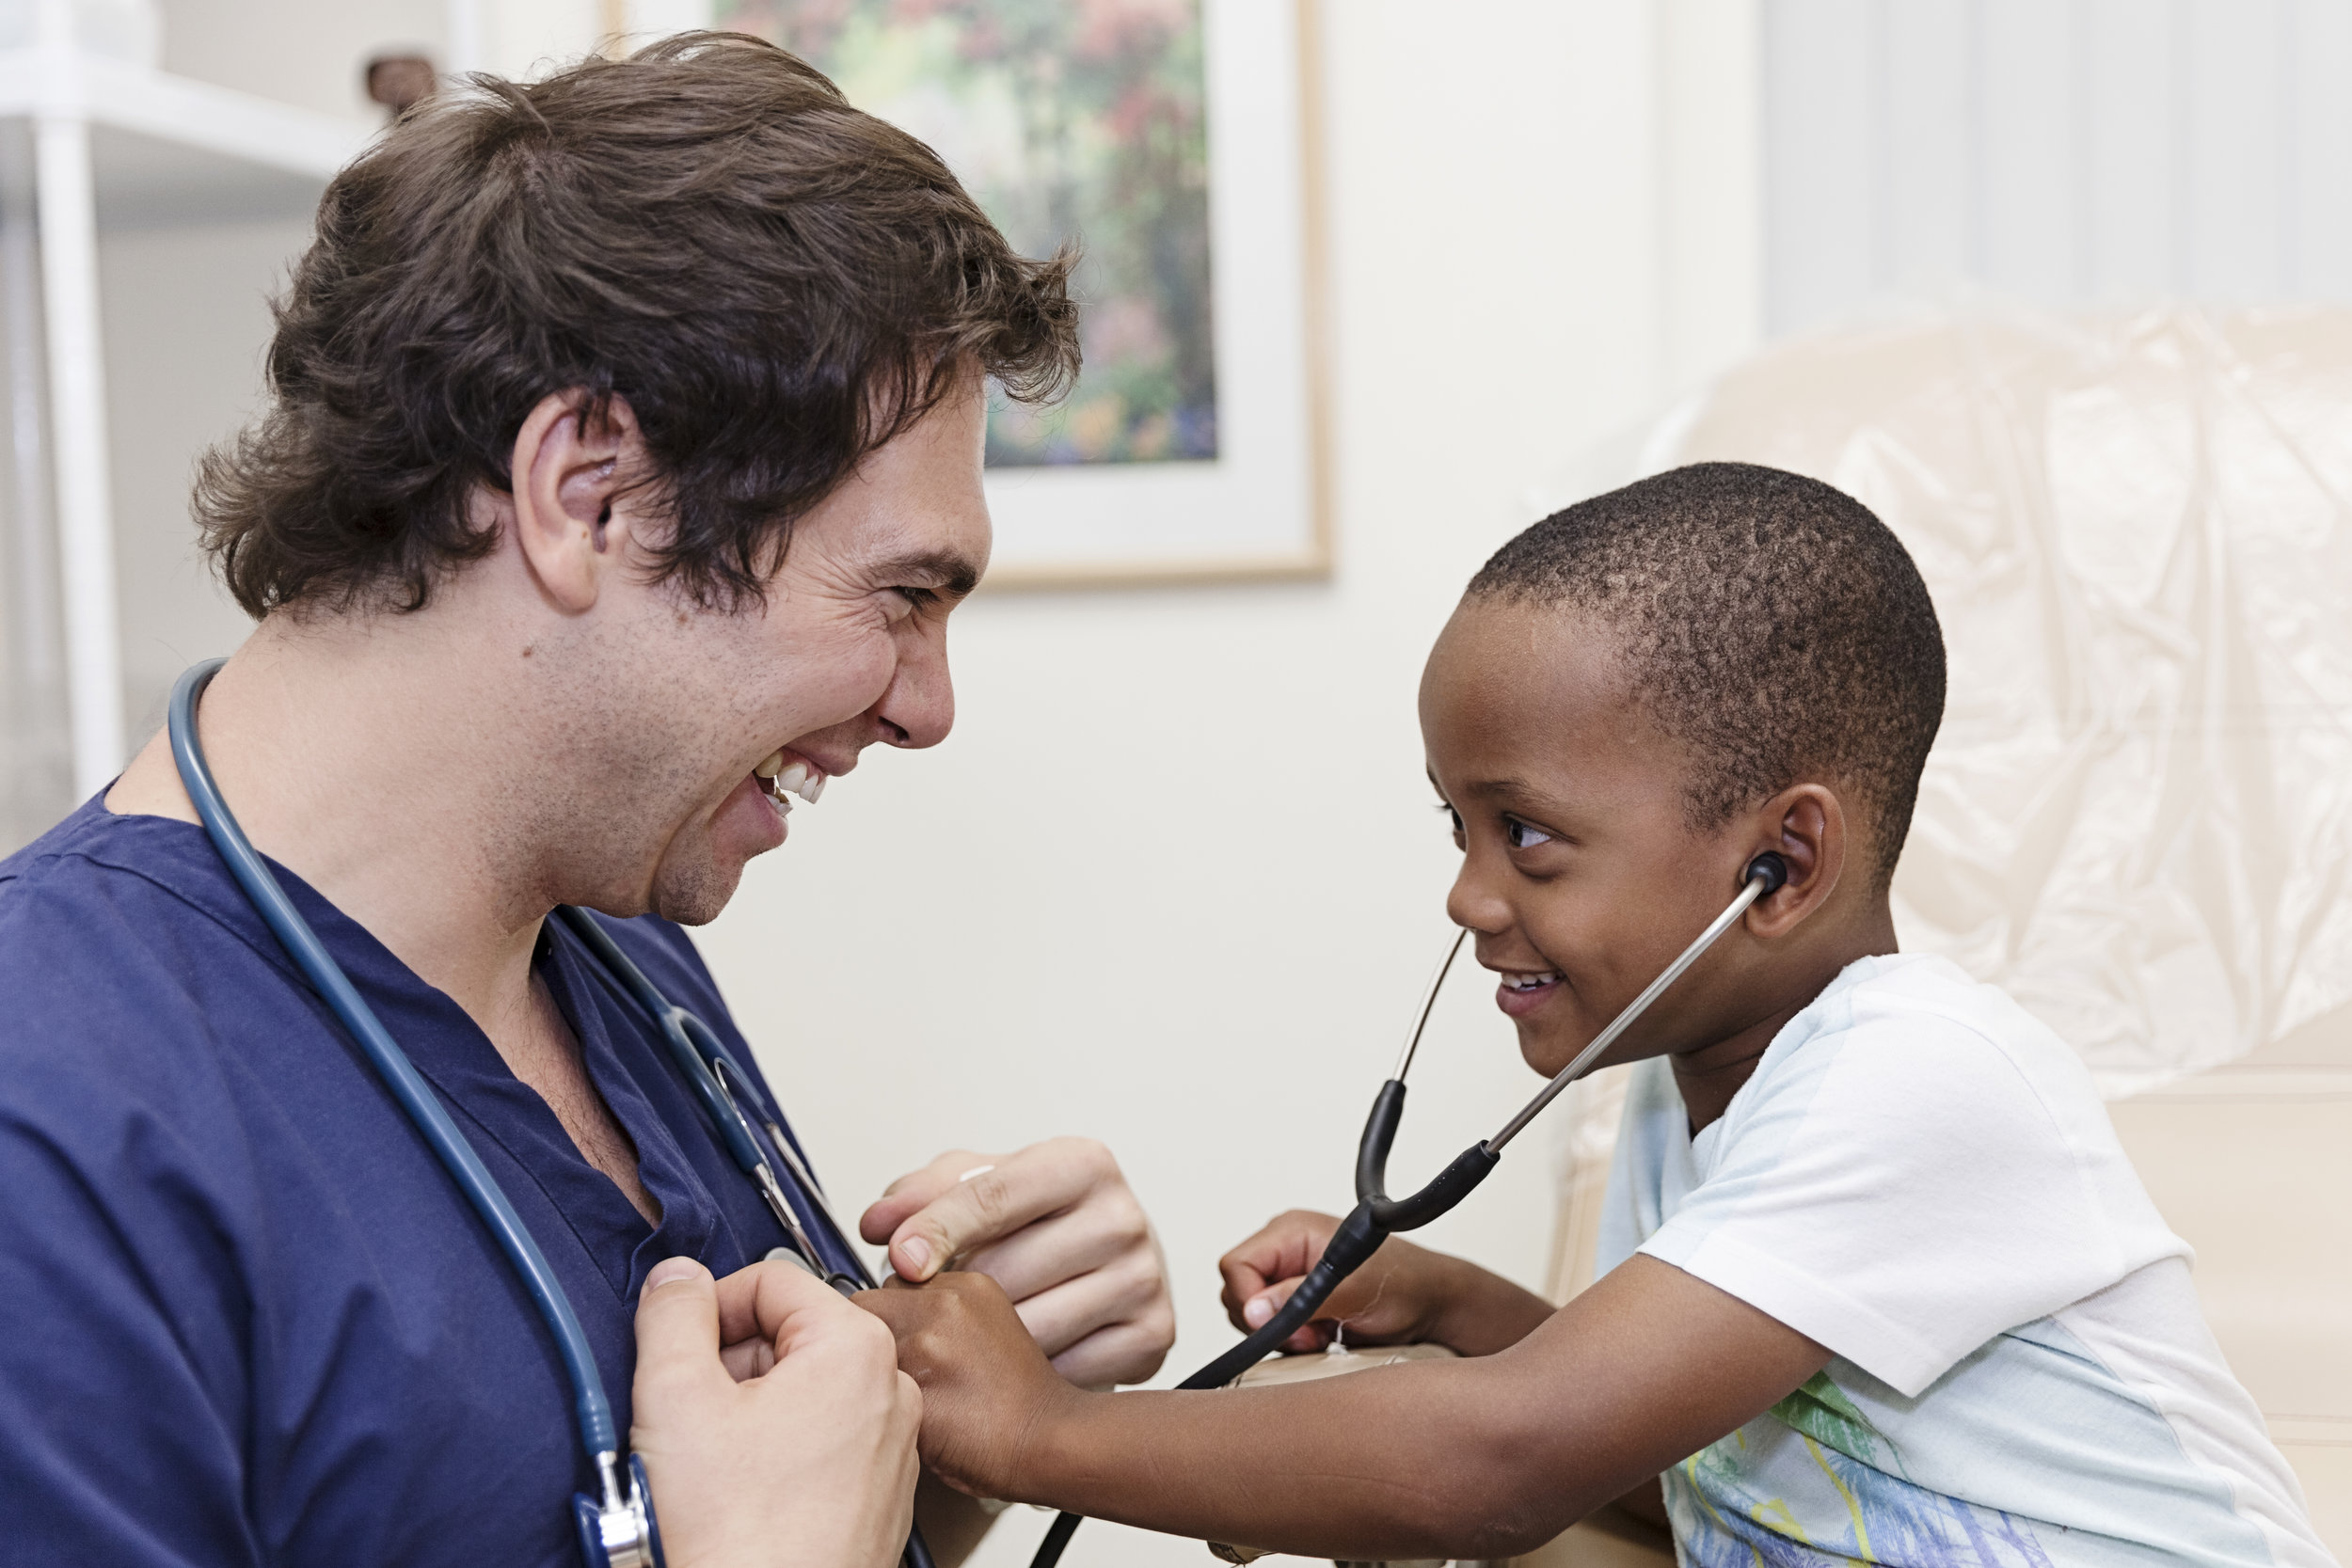 Kid playing with stethoscope